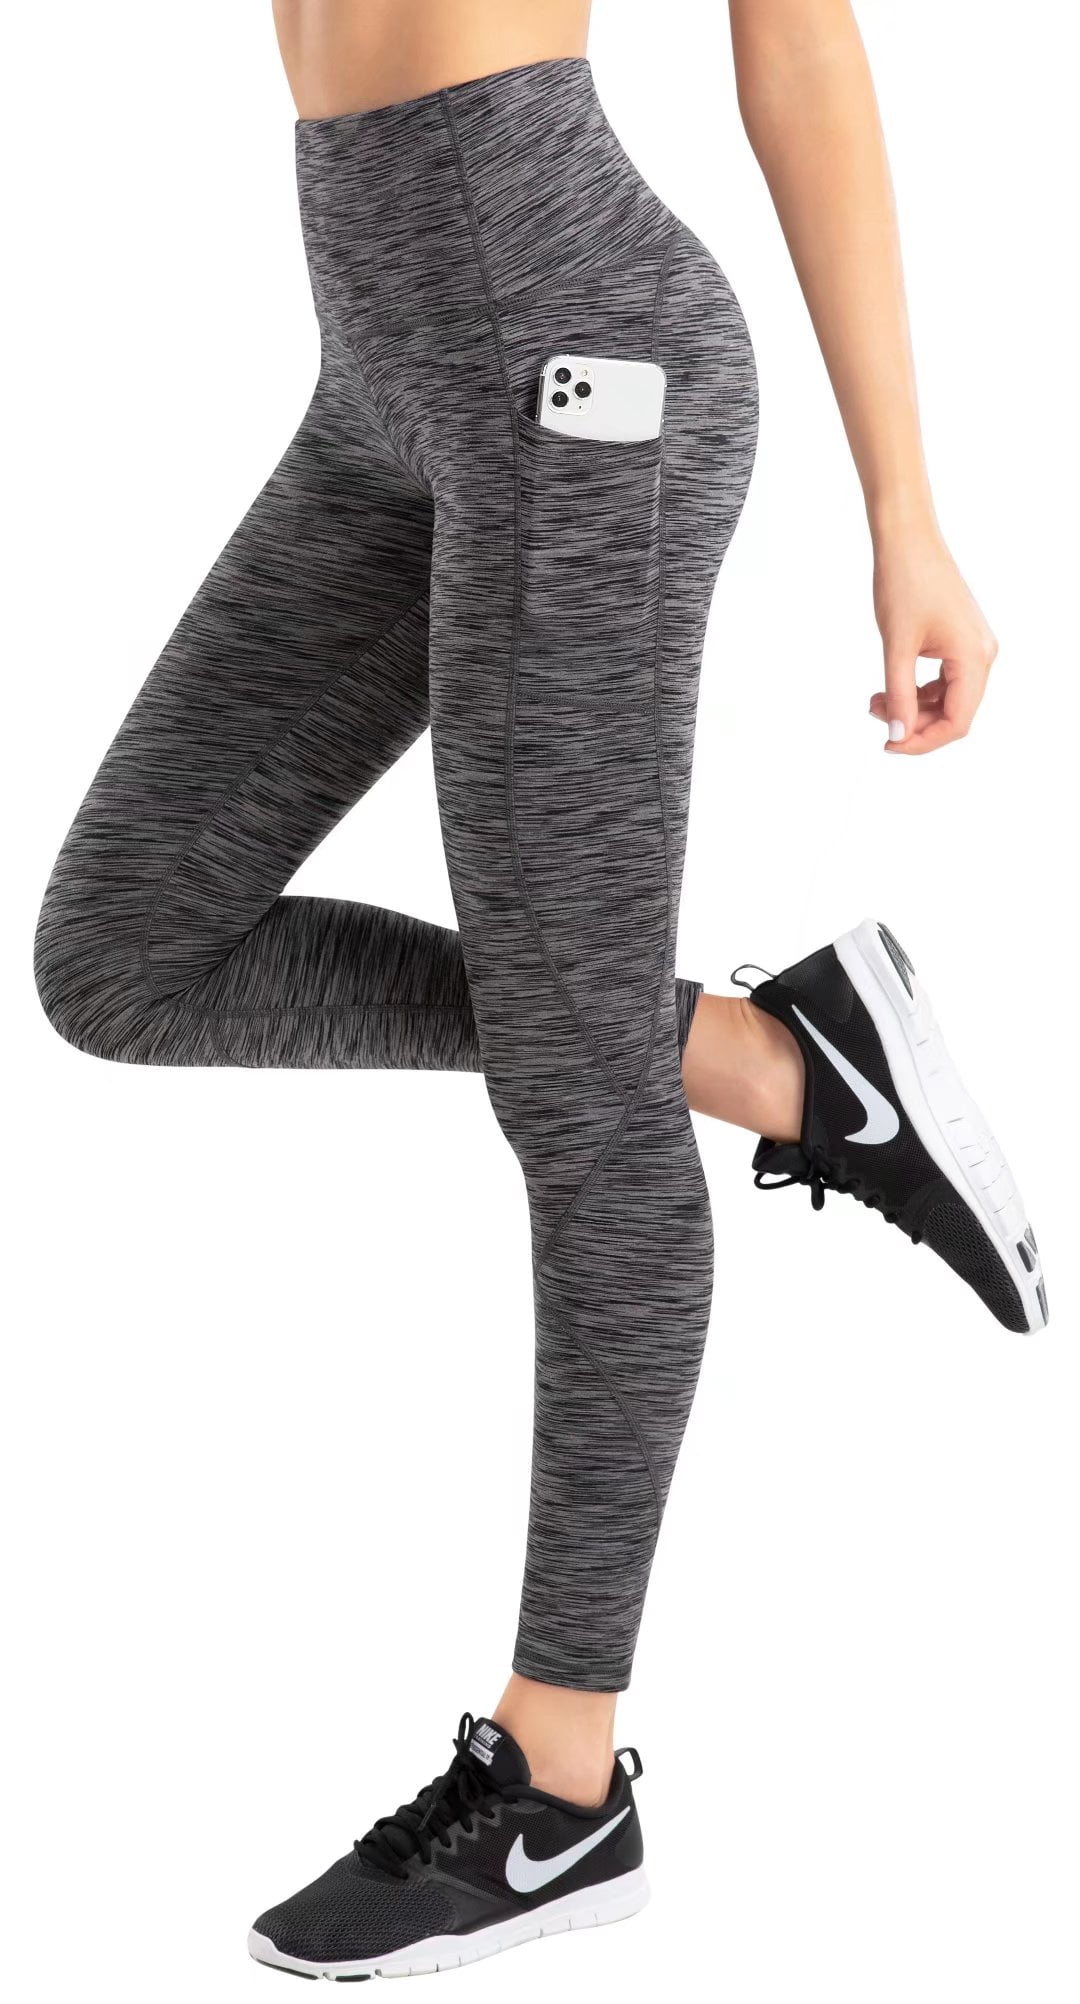 Pxiakgy yoga pants Exercise Color Yoga High Split Leisure Stretch Pants  Running Solid Women's Pants Grey + XXL 